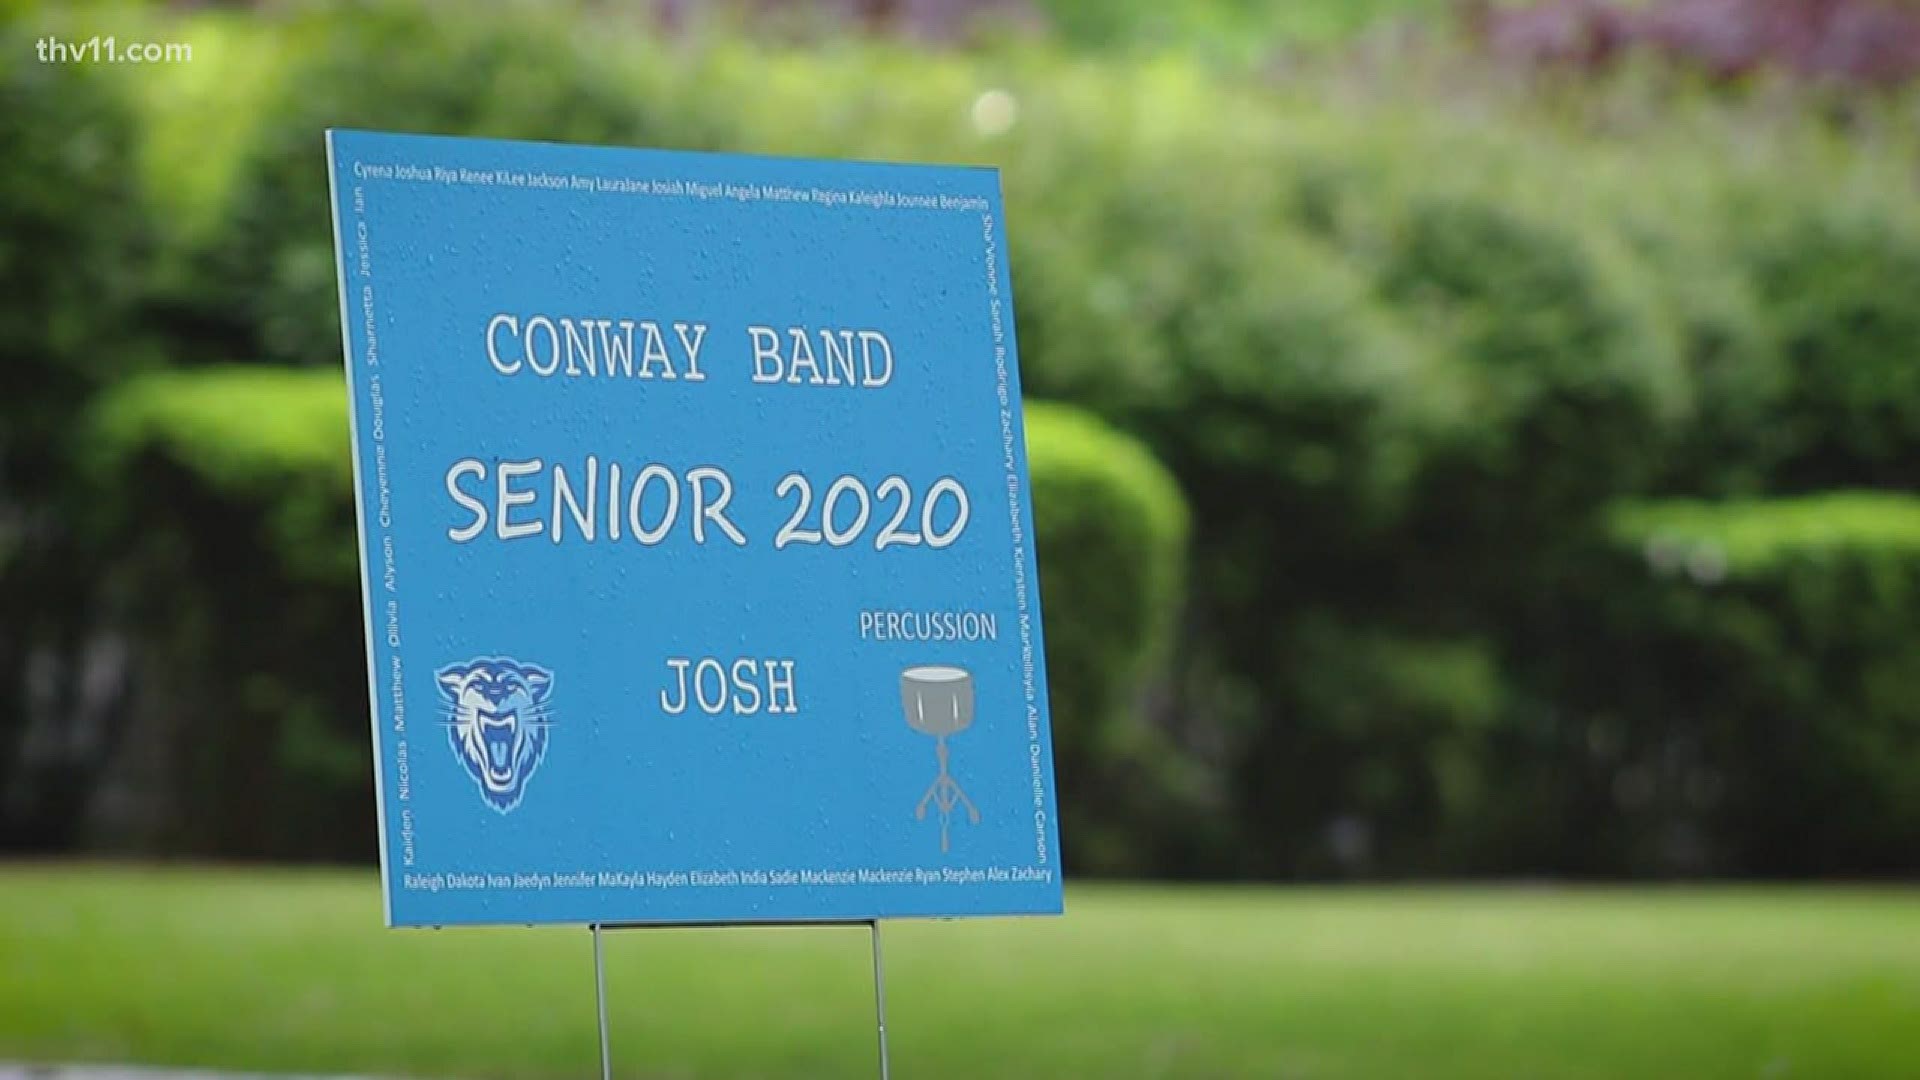 A band director at Conway High School has gone above and beyond for his senior students. He and his team surprised the band members with personalized yard signs.